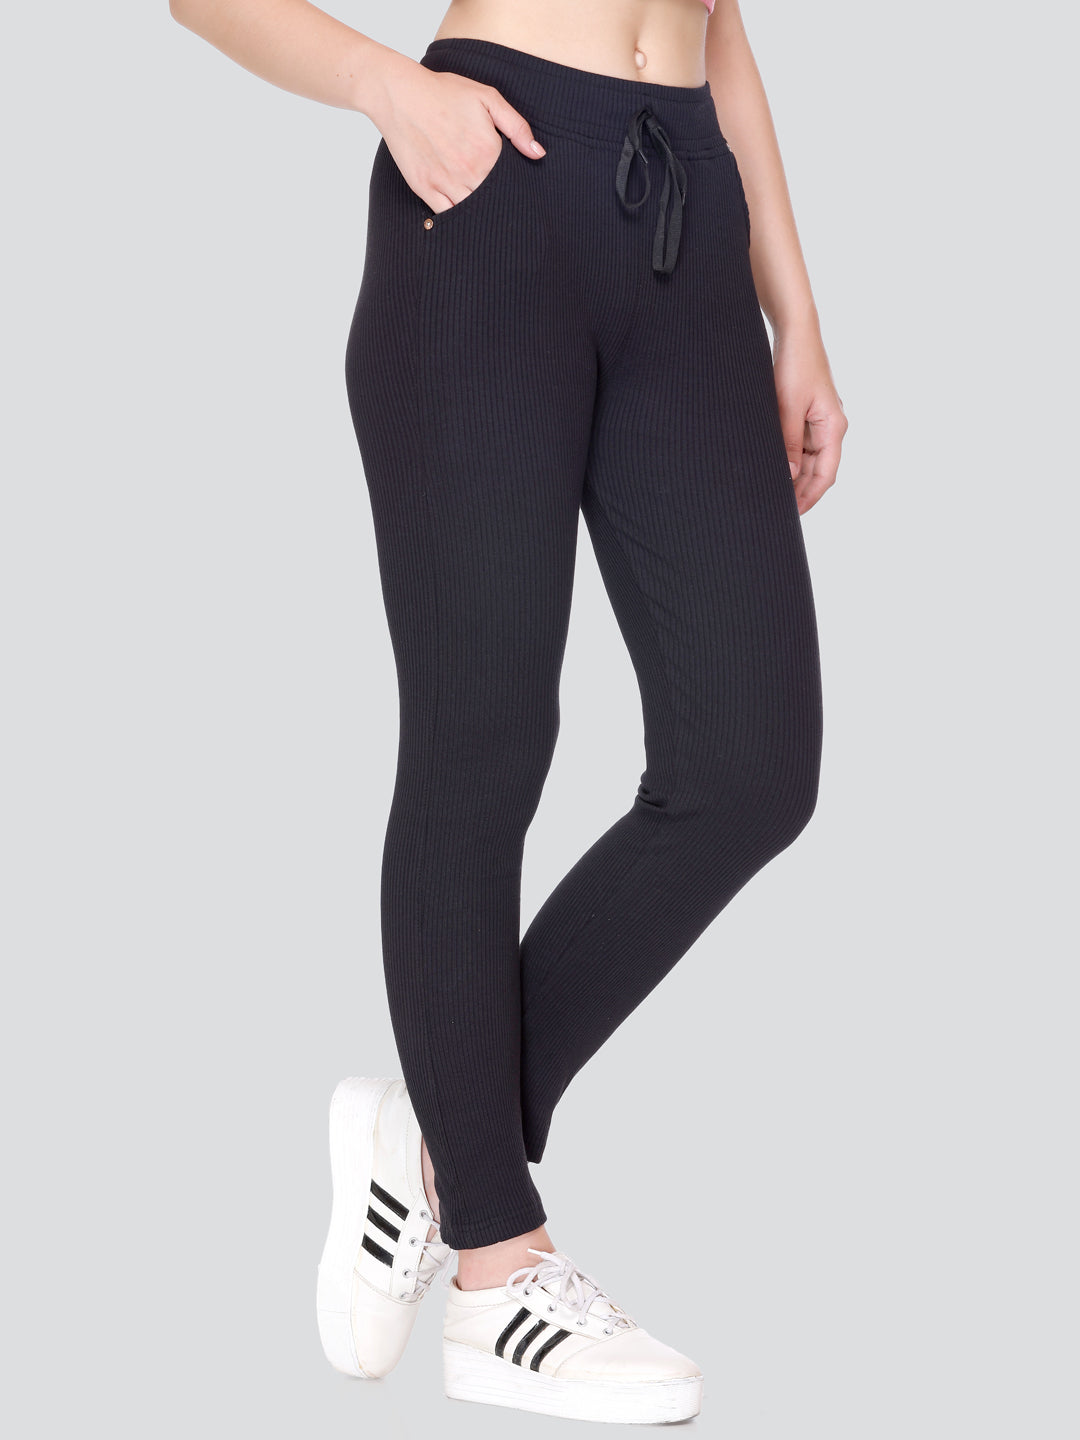 Buy High Performance Combo Leggings Online At Best Prices